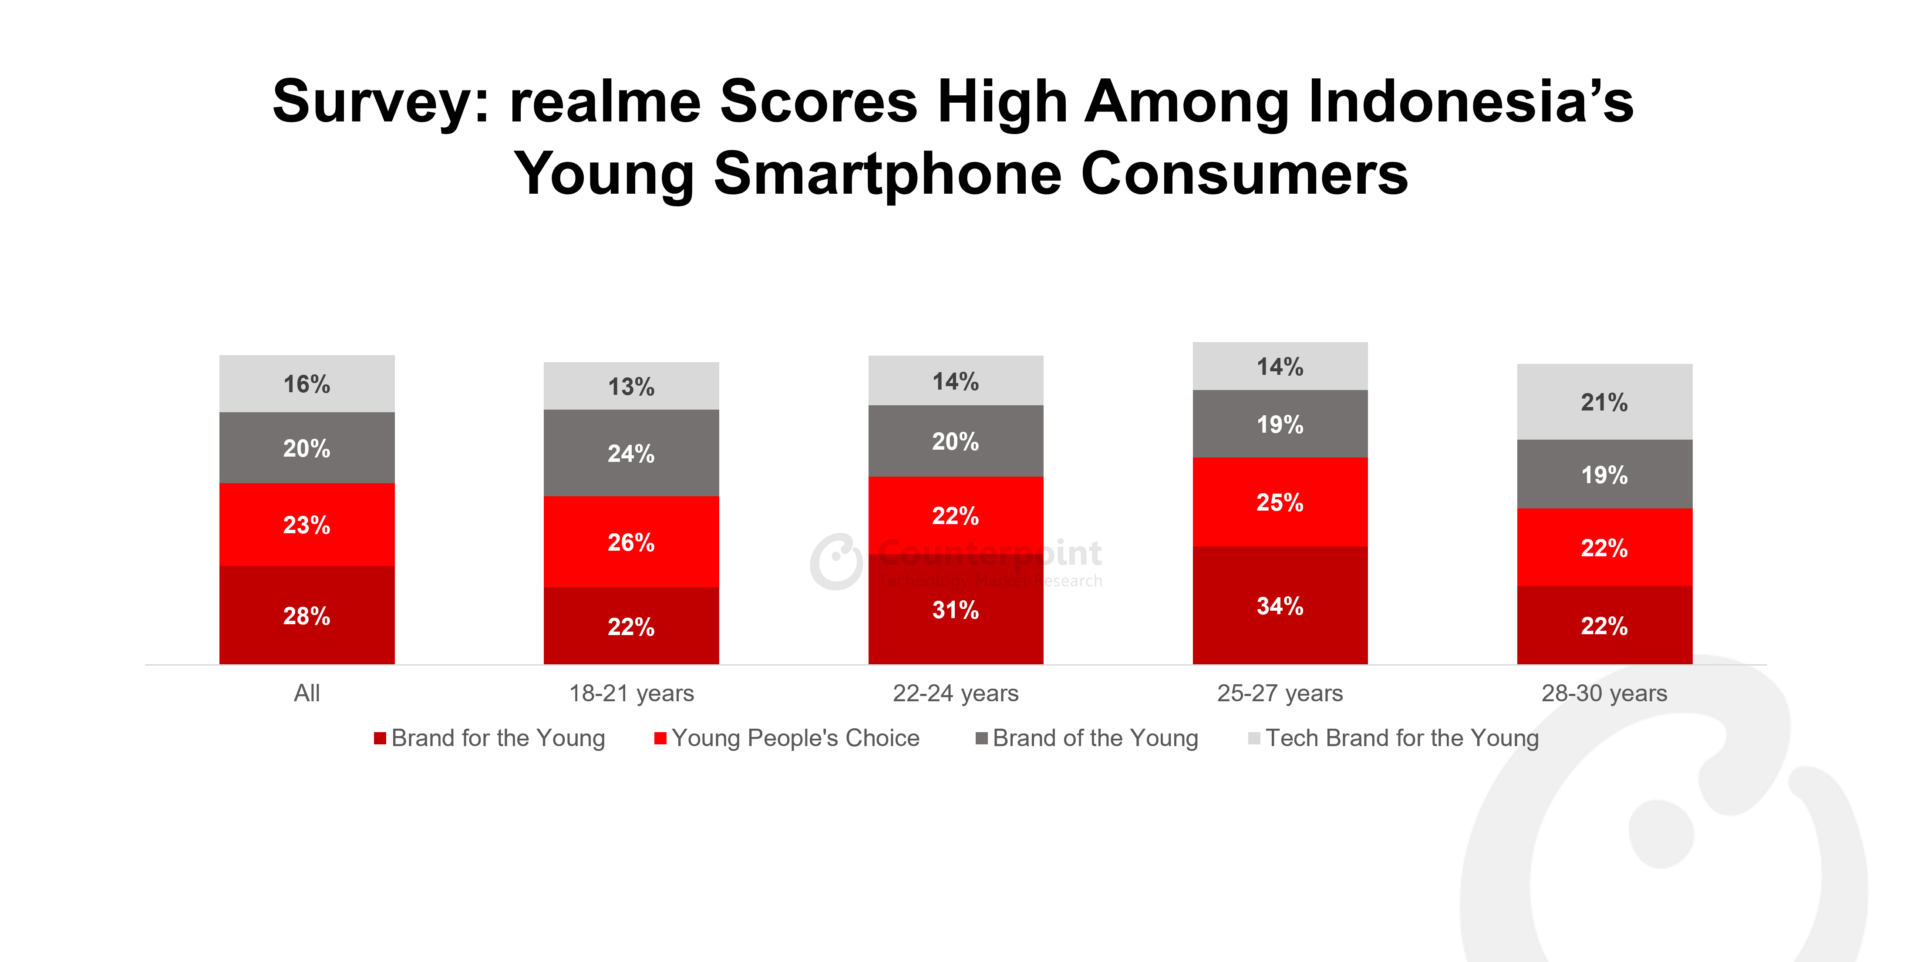 A chart showing the Associated Value for realme by Age Group